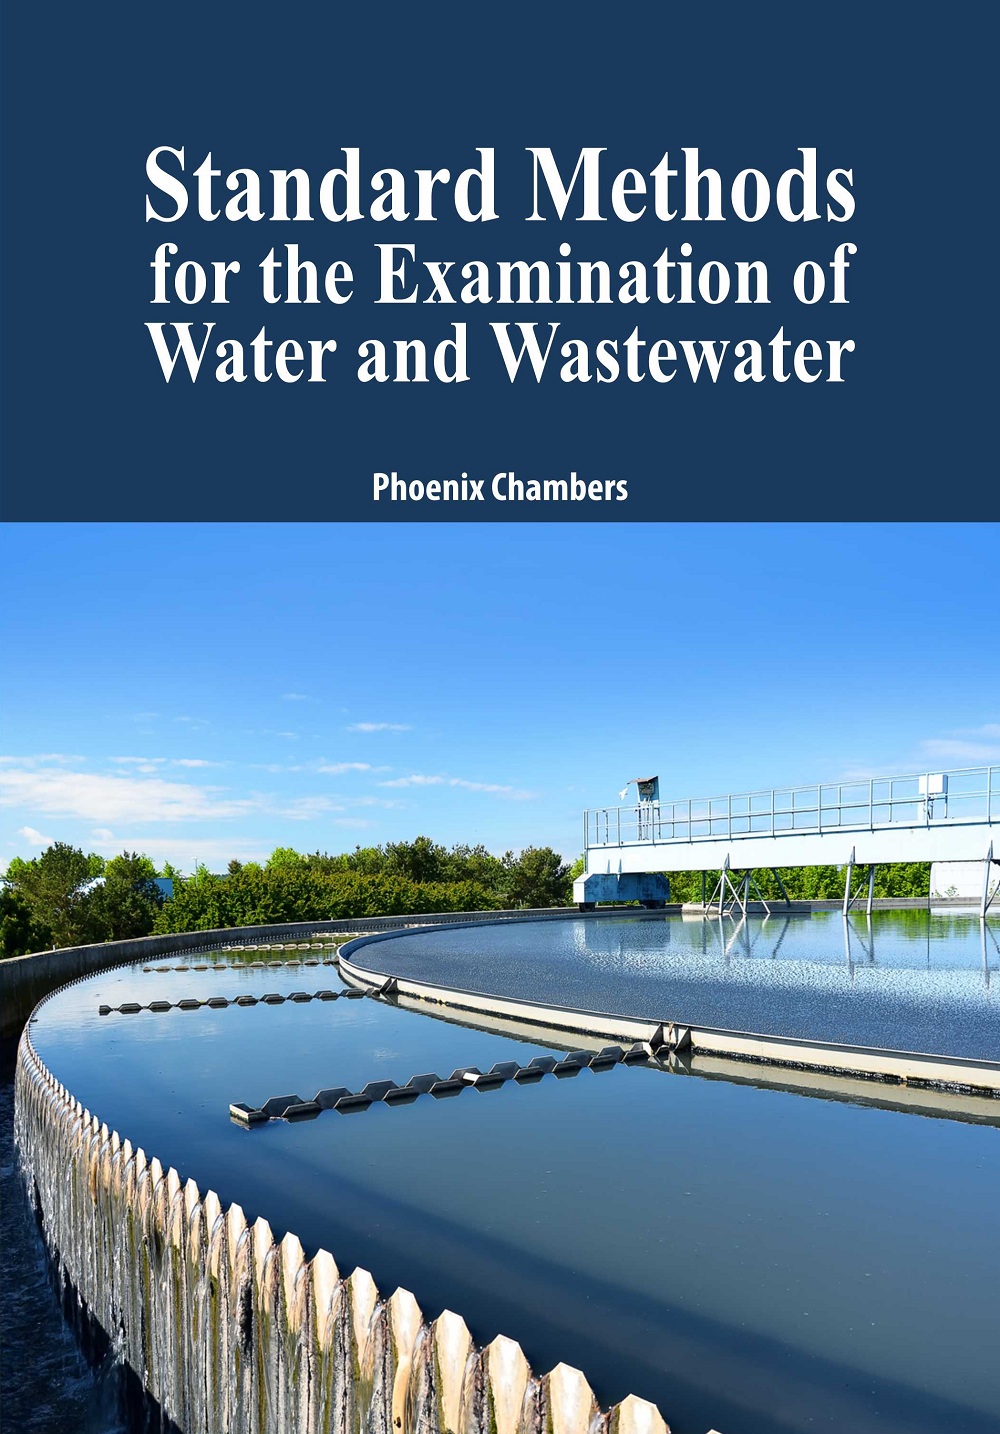 Standard Methods for the Examination of Water and Wastewater